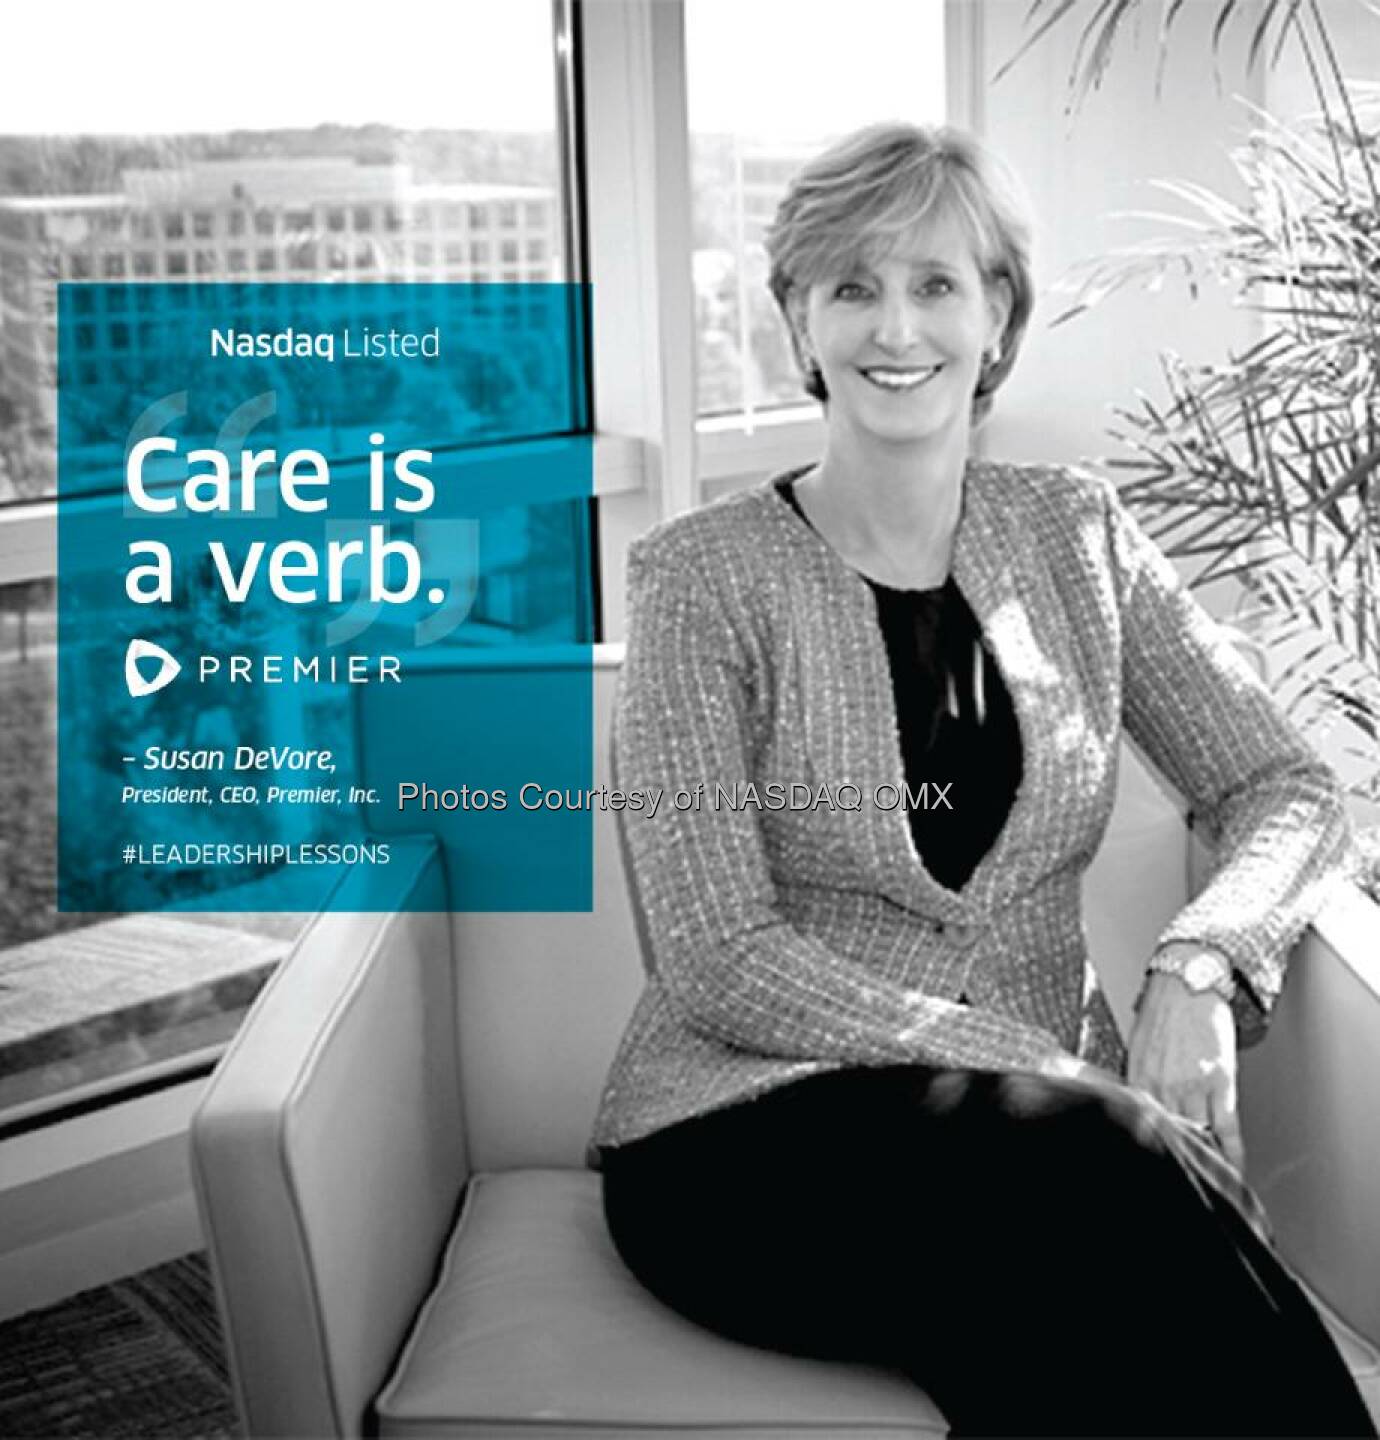 Care is a verb.” #LeadershipLessons from Susan DeVore, President and CEO of Premier, Inc. $PINC  Source: http://facebook.com/NASDAQ